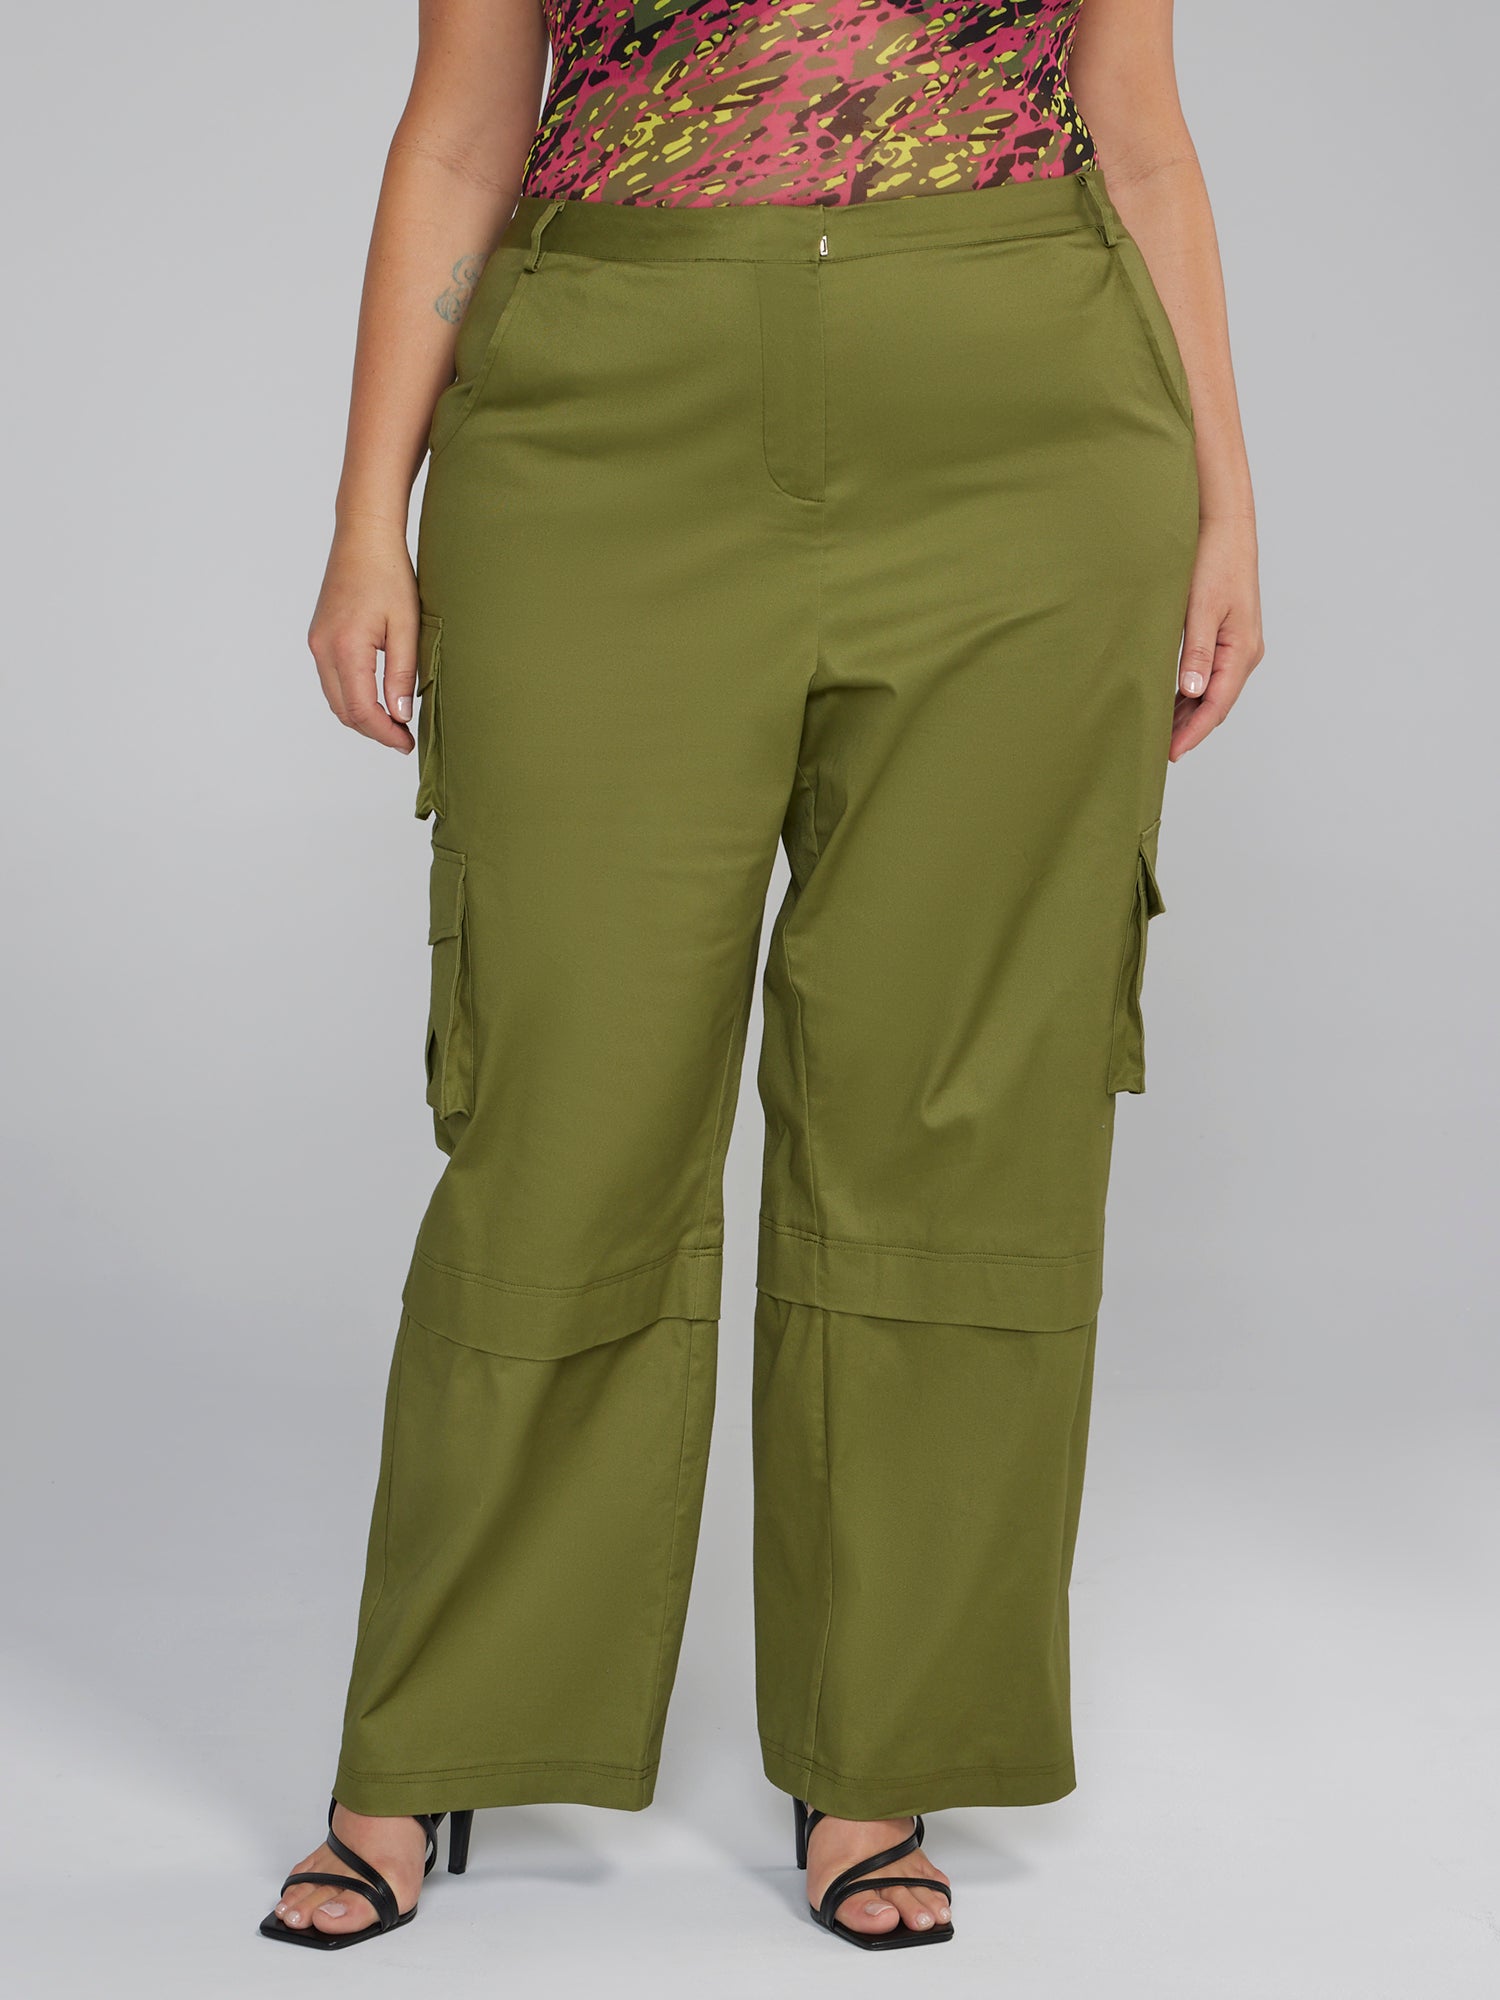 Almond Brown Women's Straight Leg Cargo Pants Casual Y2K High Waisted –  Lookbook Store